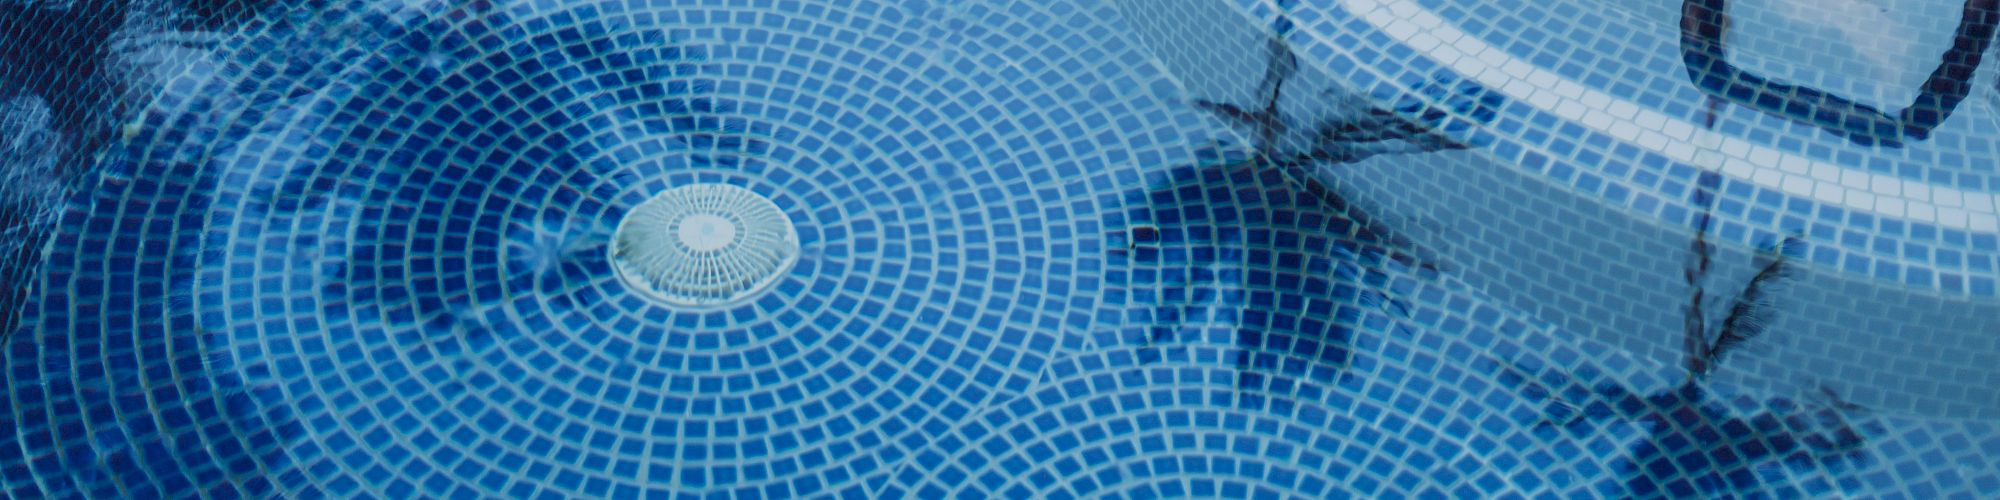 The image shows the clear water of a circular swimming pool with blue mosaic tiles, reflecting palm trees and the sky above, creating a serene scene.